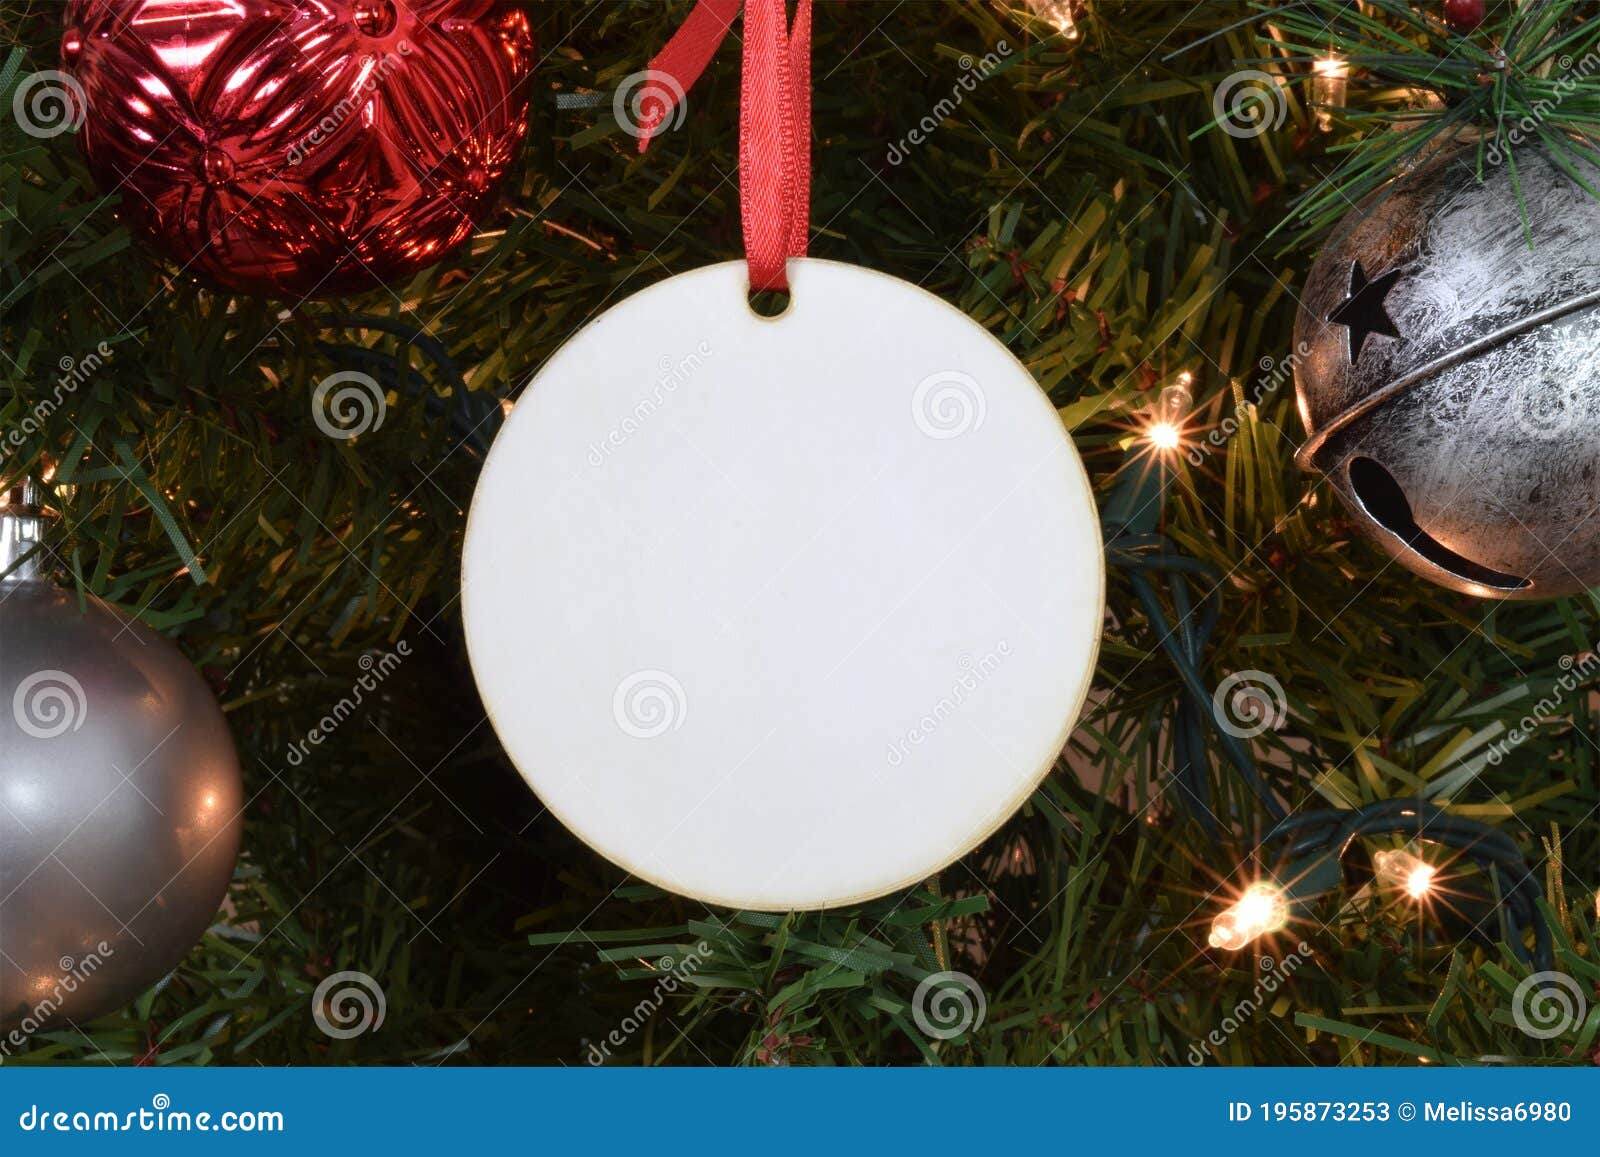 Add your own image and background Clear round Christmas ornament mockup template